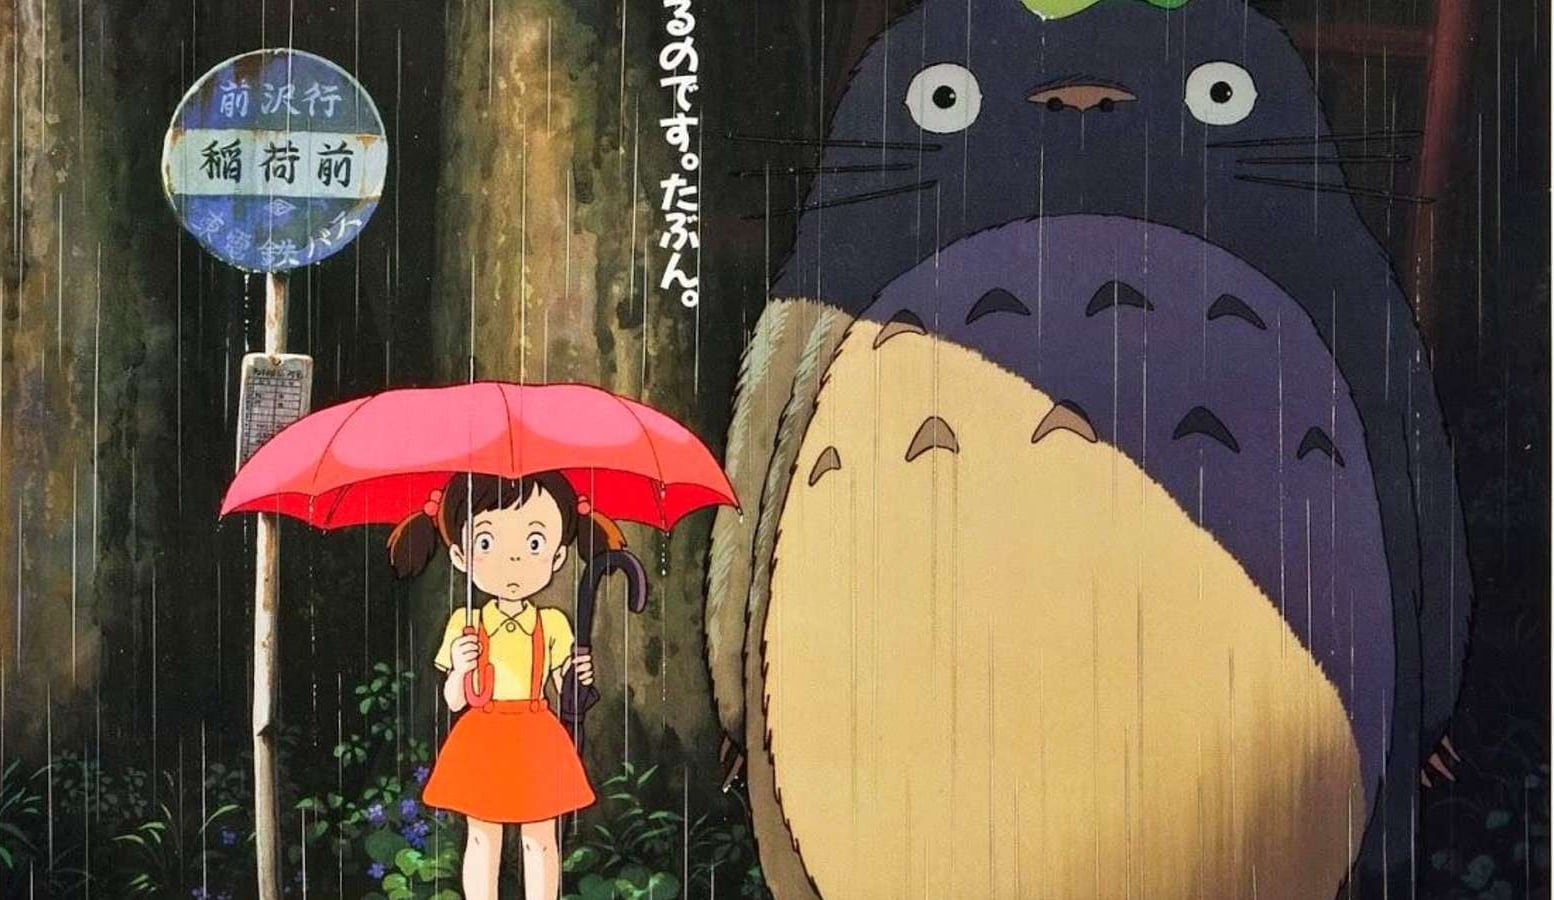 Trivia Finally Explains Why Totoro Poster Has a Girl Who's Not in the Movie